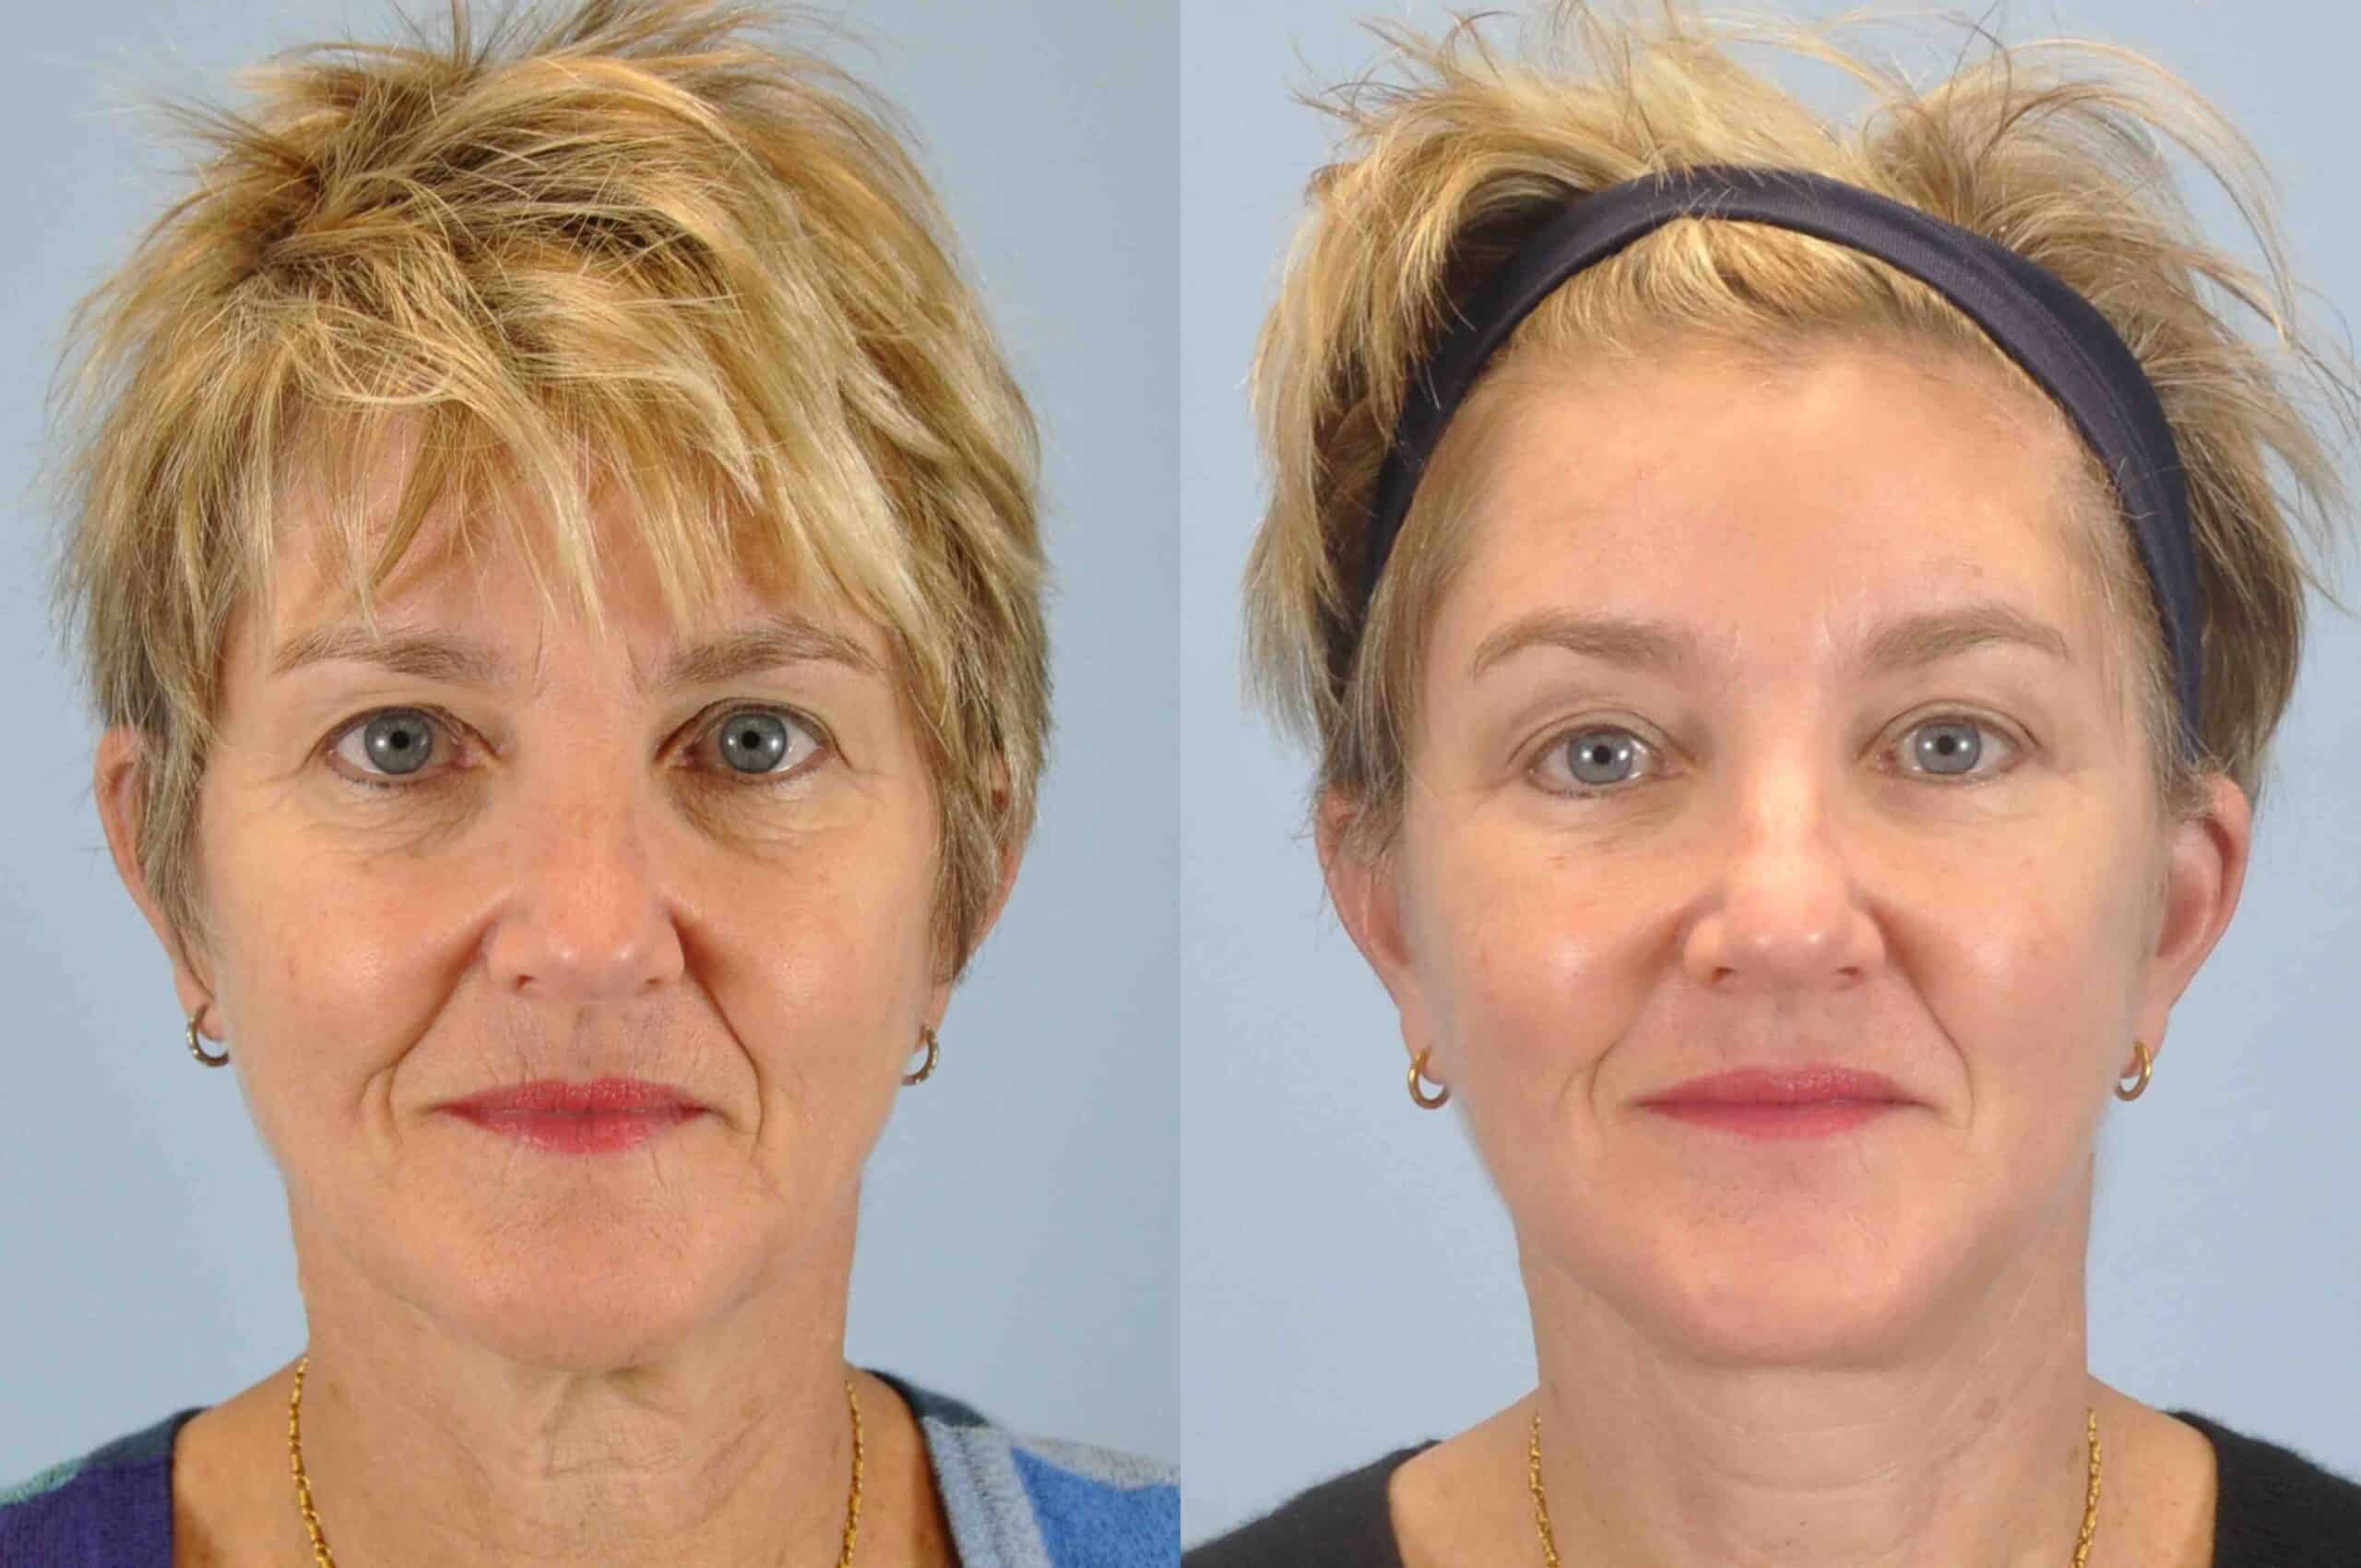 Before and after, patient 3 mo post op form Upper and Lower Blepharoplasty, Autologous Fat Transfer to Face, Facelift, Neck Lift performed by Dr. Paul Vanek